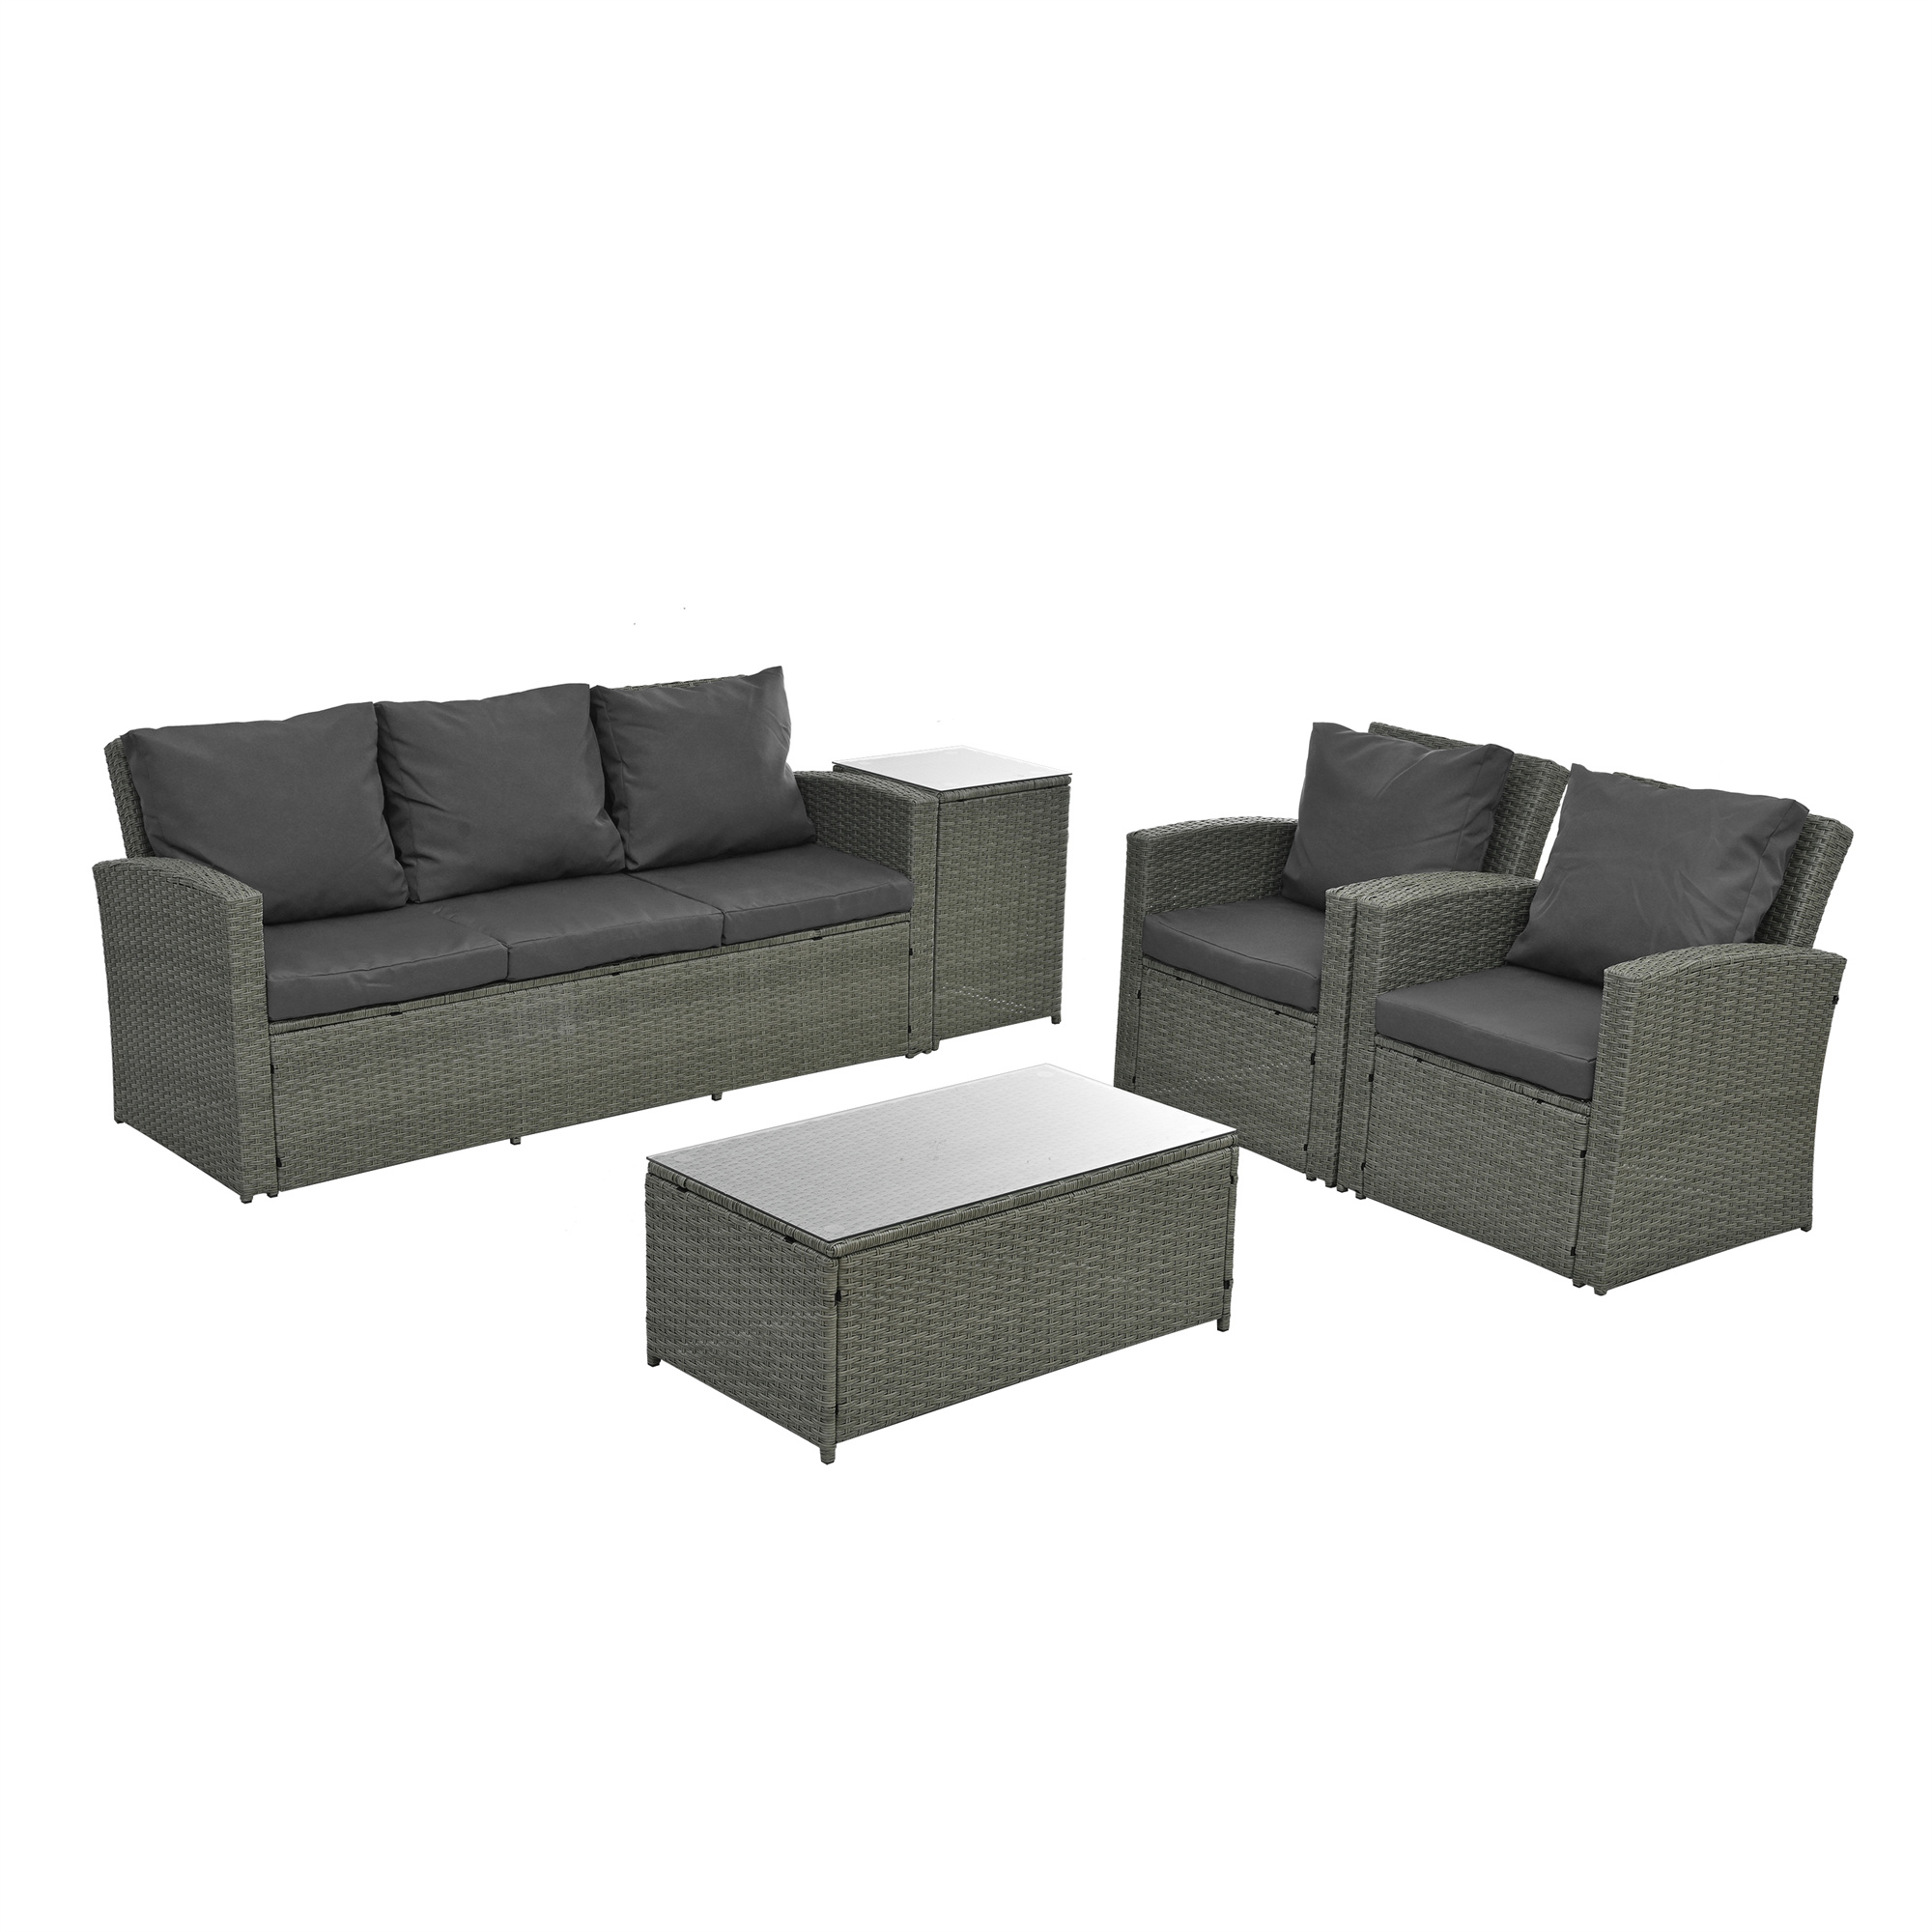 Highsound 5 Pieces Patio Furniture Set, All-Weather PE Rattan Wicker Patio Conversation Set, Cushioned Sofa Set with 2 Glass Tables for Patio Garden Poolside Deck, Gray Cushions - image 5 of 9